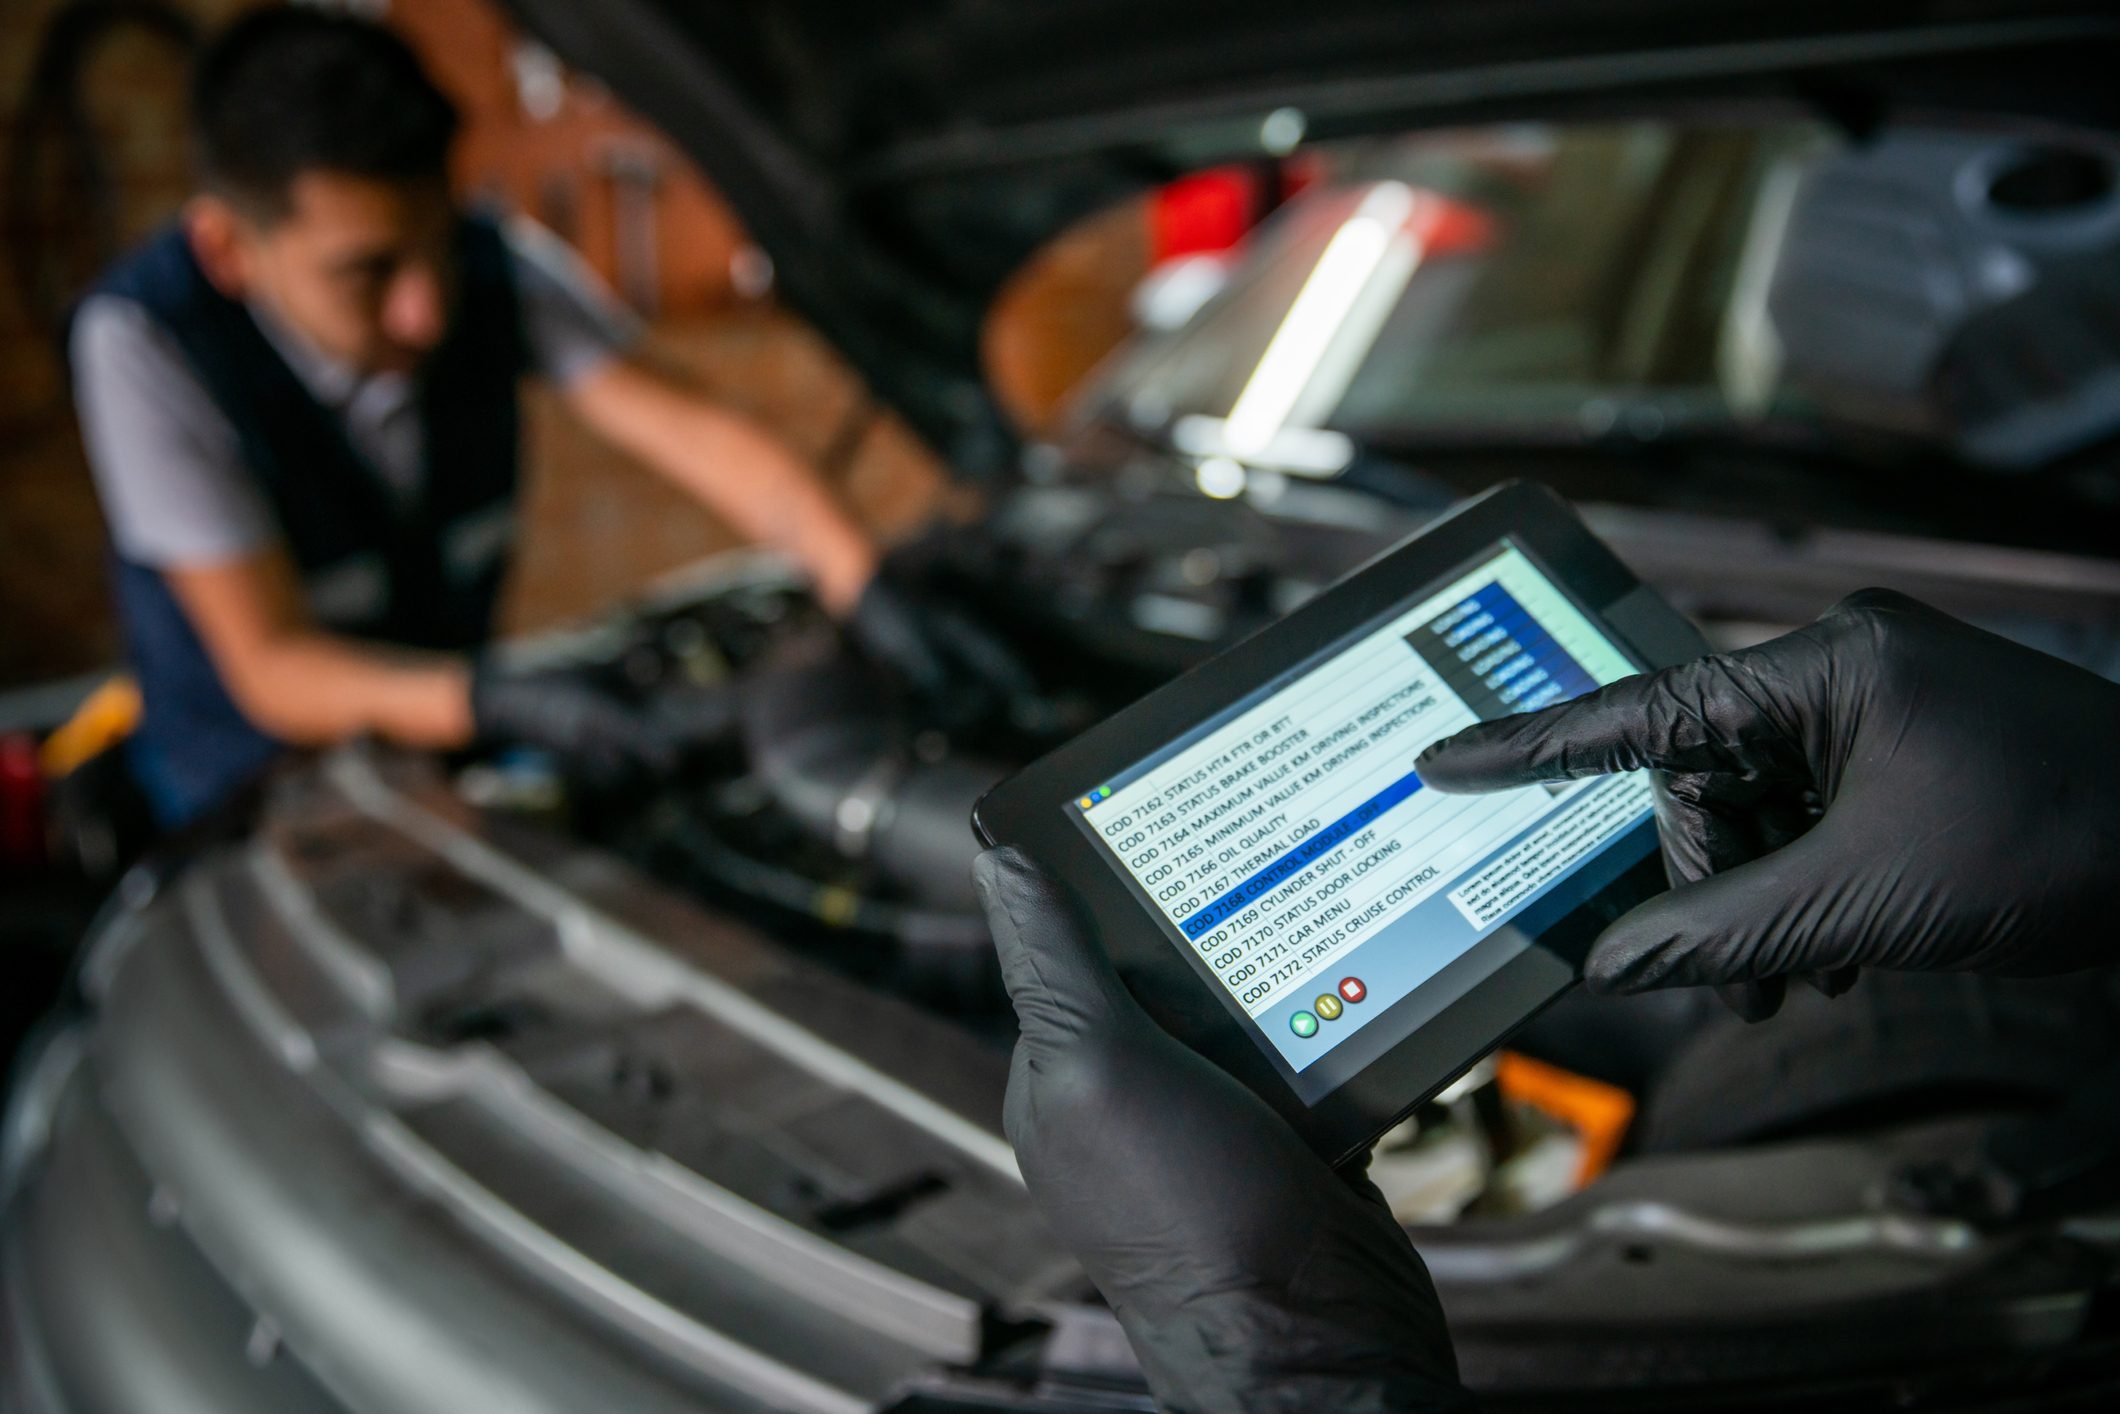 Team of mechanics working together on a car, one of them holding a tablet to check the sensor readings while the other one adjusts them on the engine